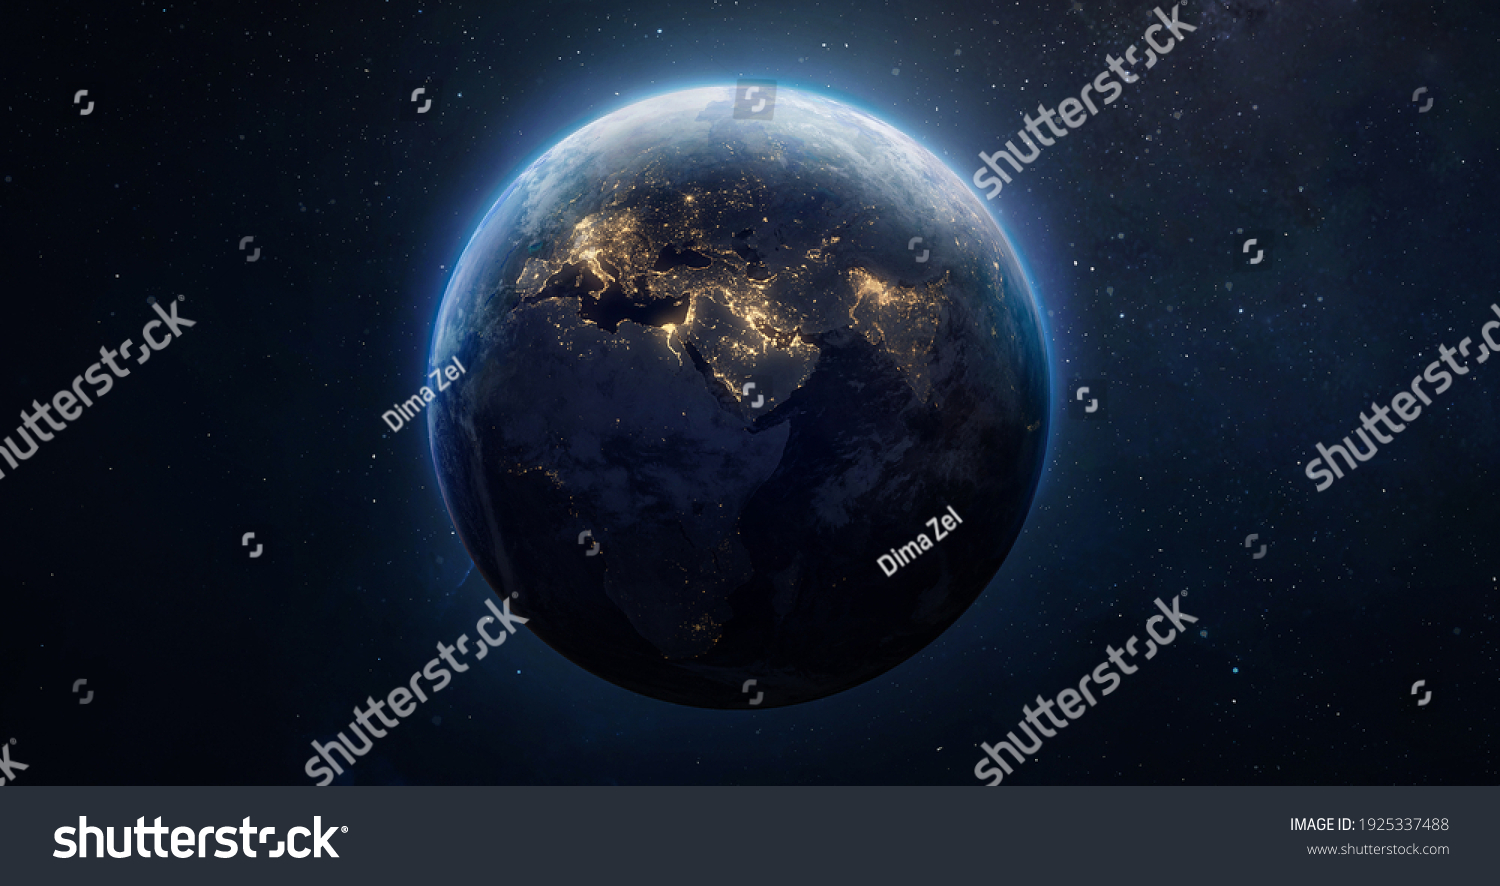 Sphere of nightly Earth planet in outer space. City lights on planet. Life of people. Solar system element. Elements of this image furnished by NASA #1925337488